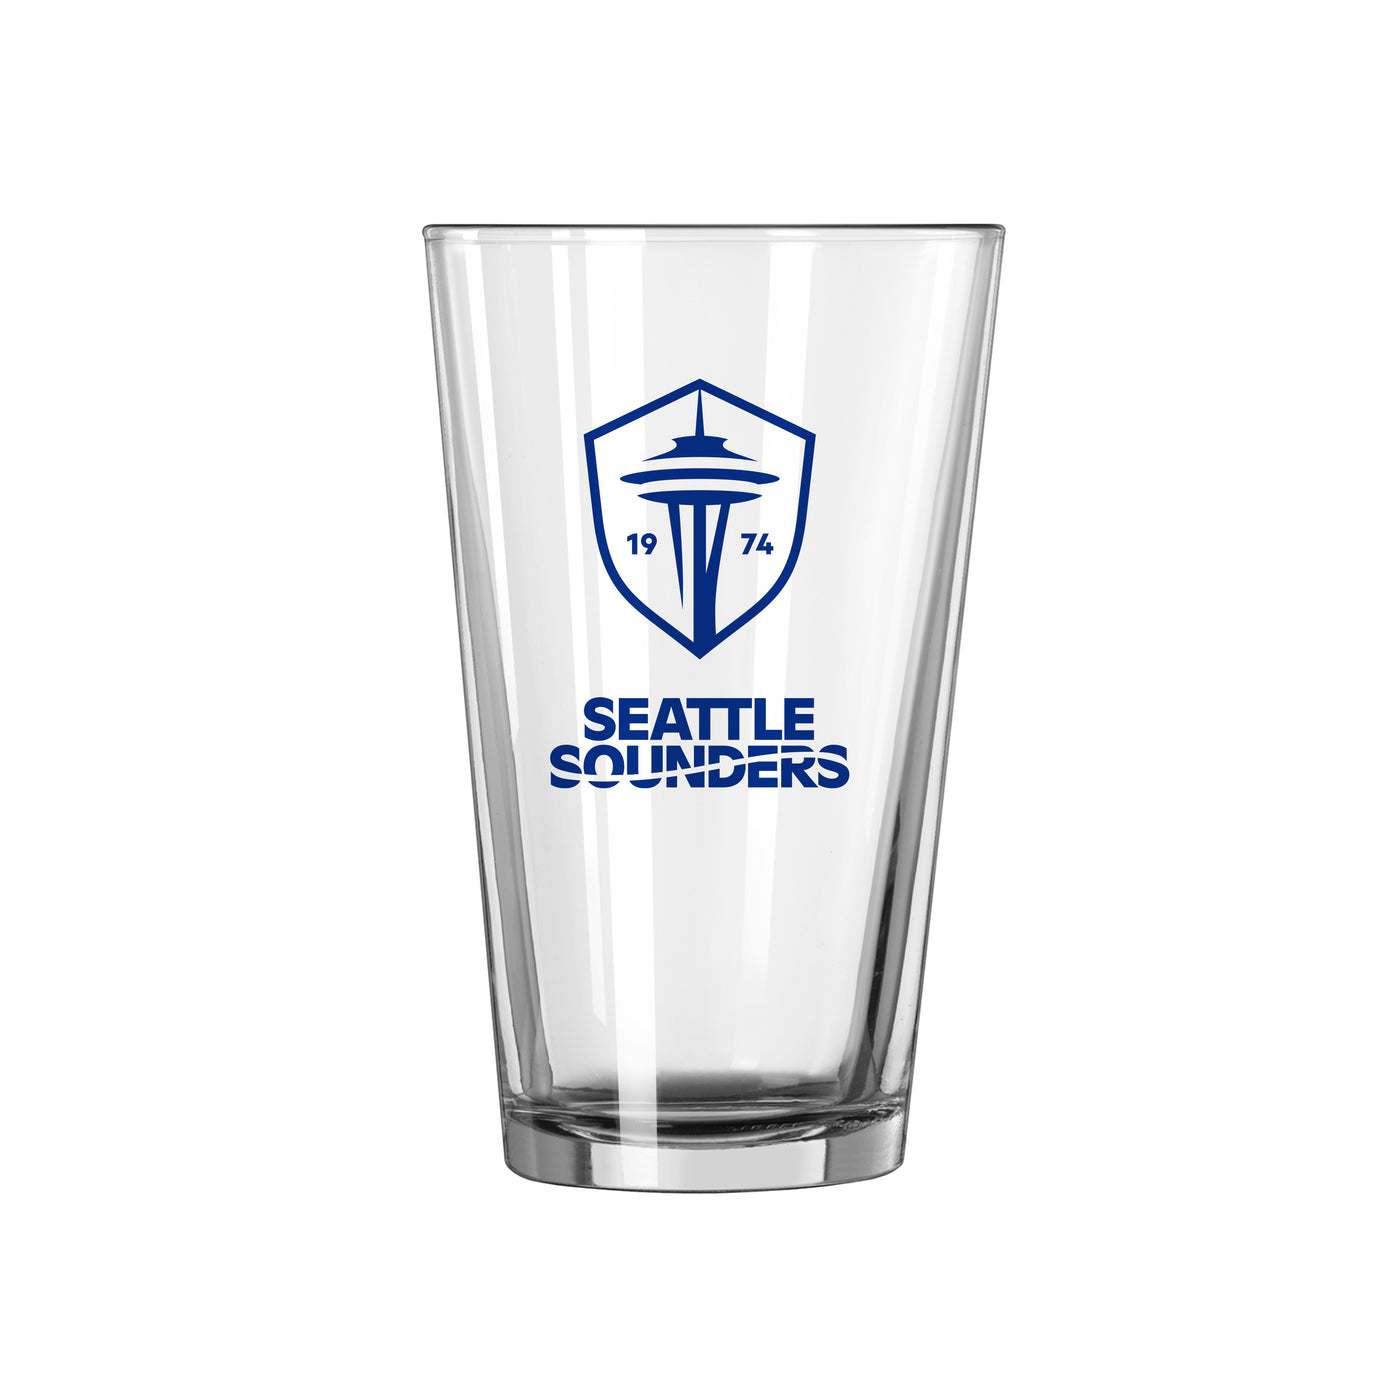 Seattle Sounders 16oz Gameday Pint Glass